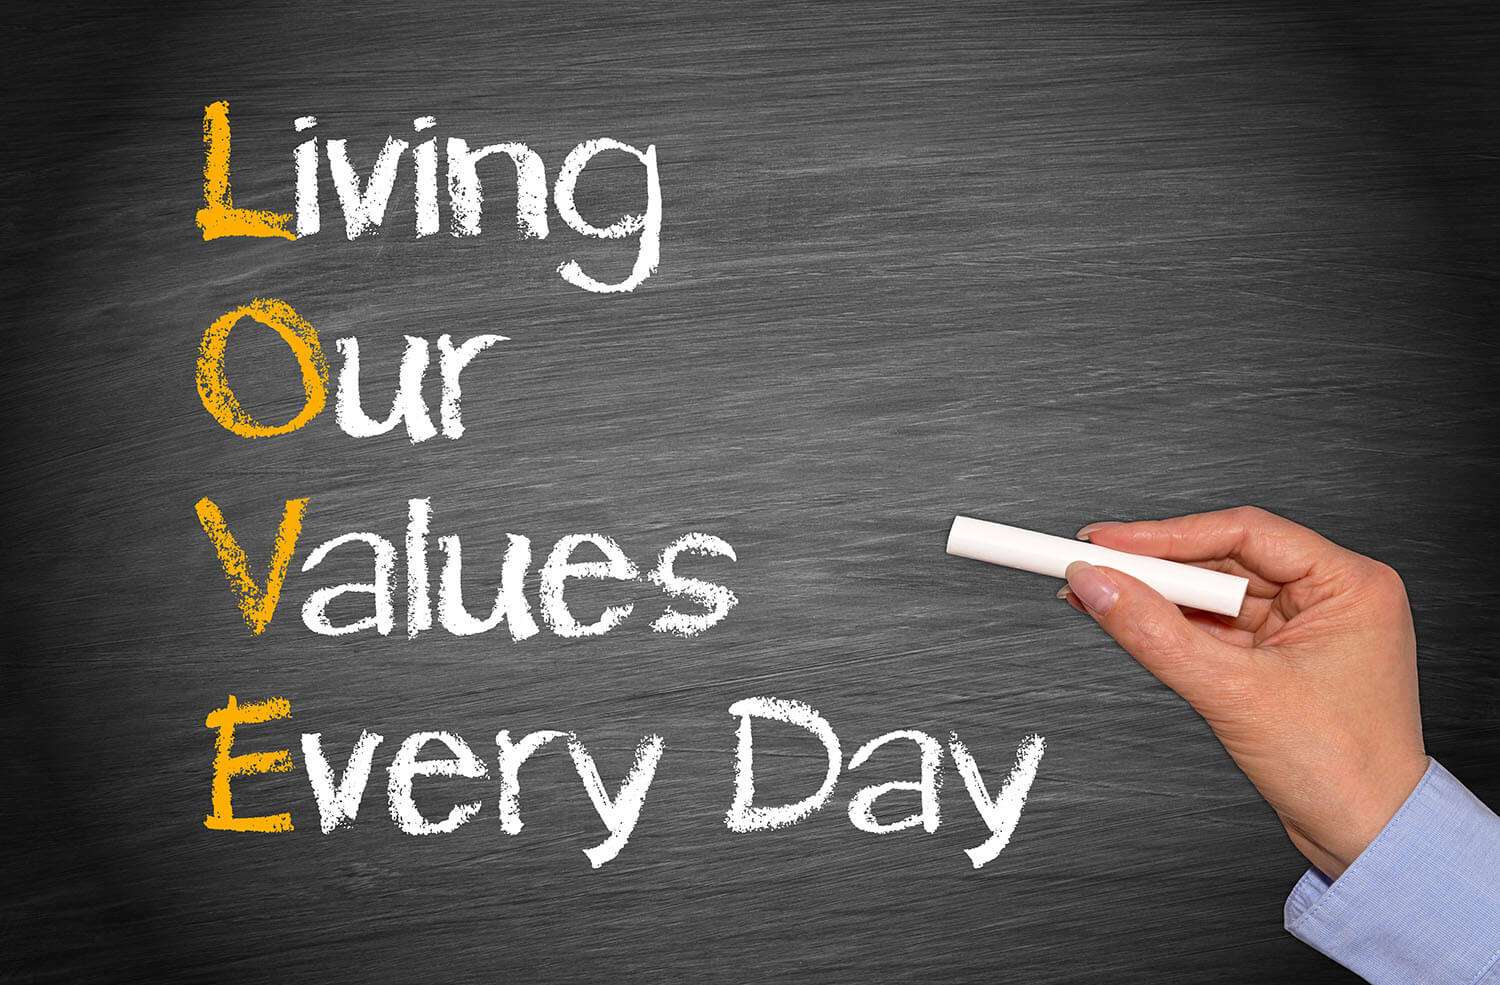 Living our values every day